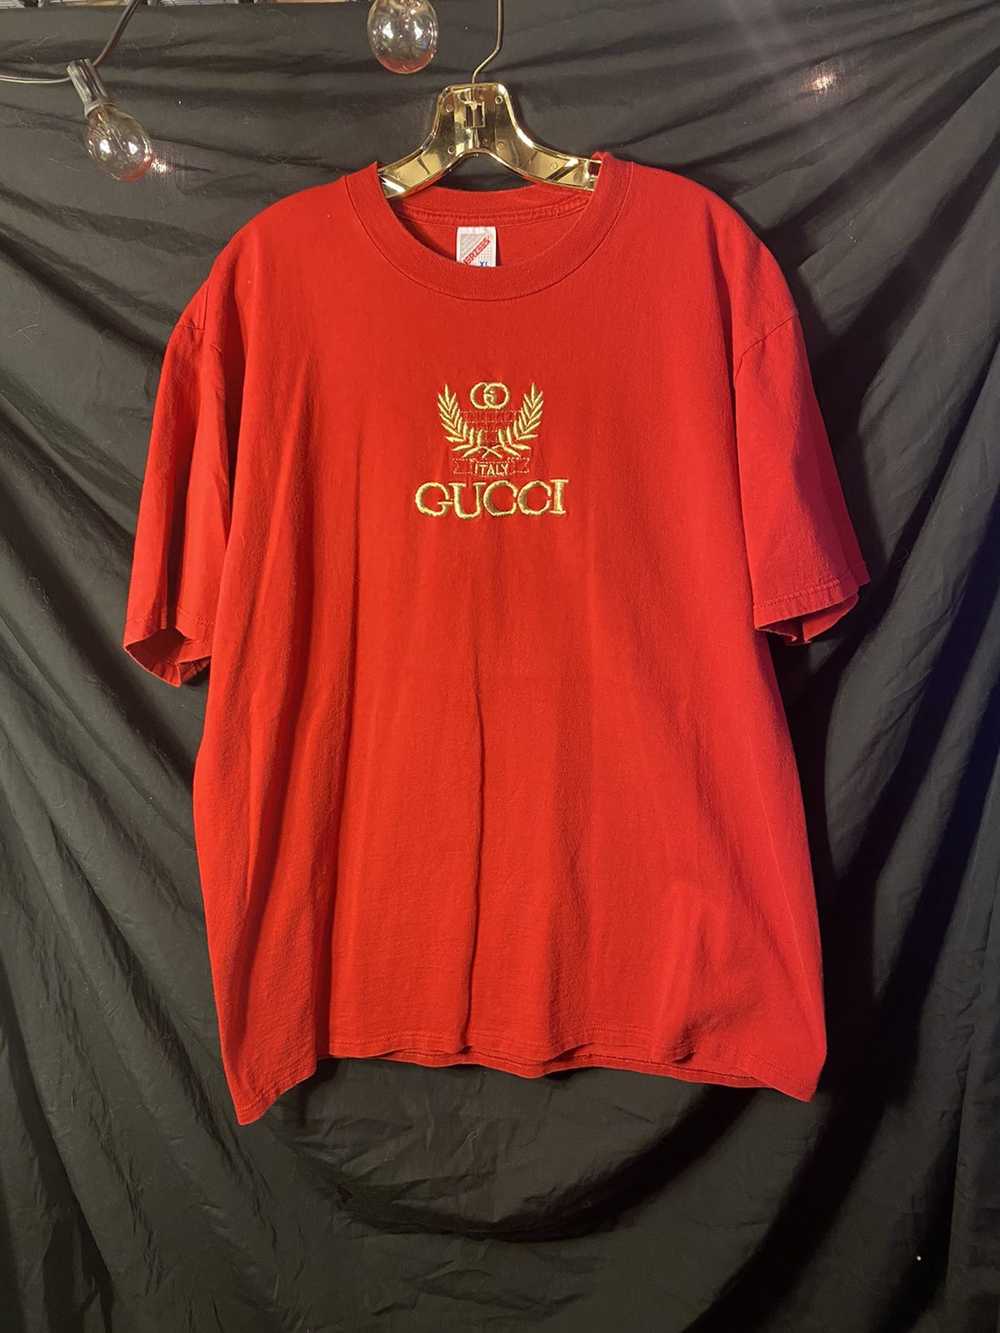 Jerzees Vintage 90s Gucci Embroidered Graphic Tee - image 1